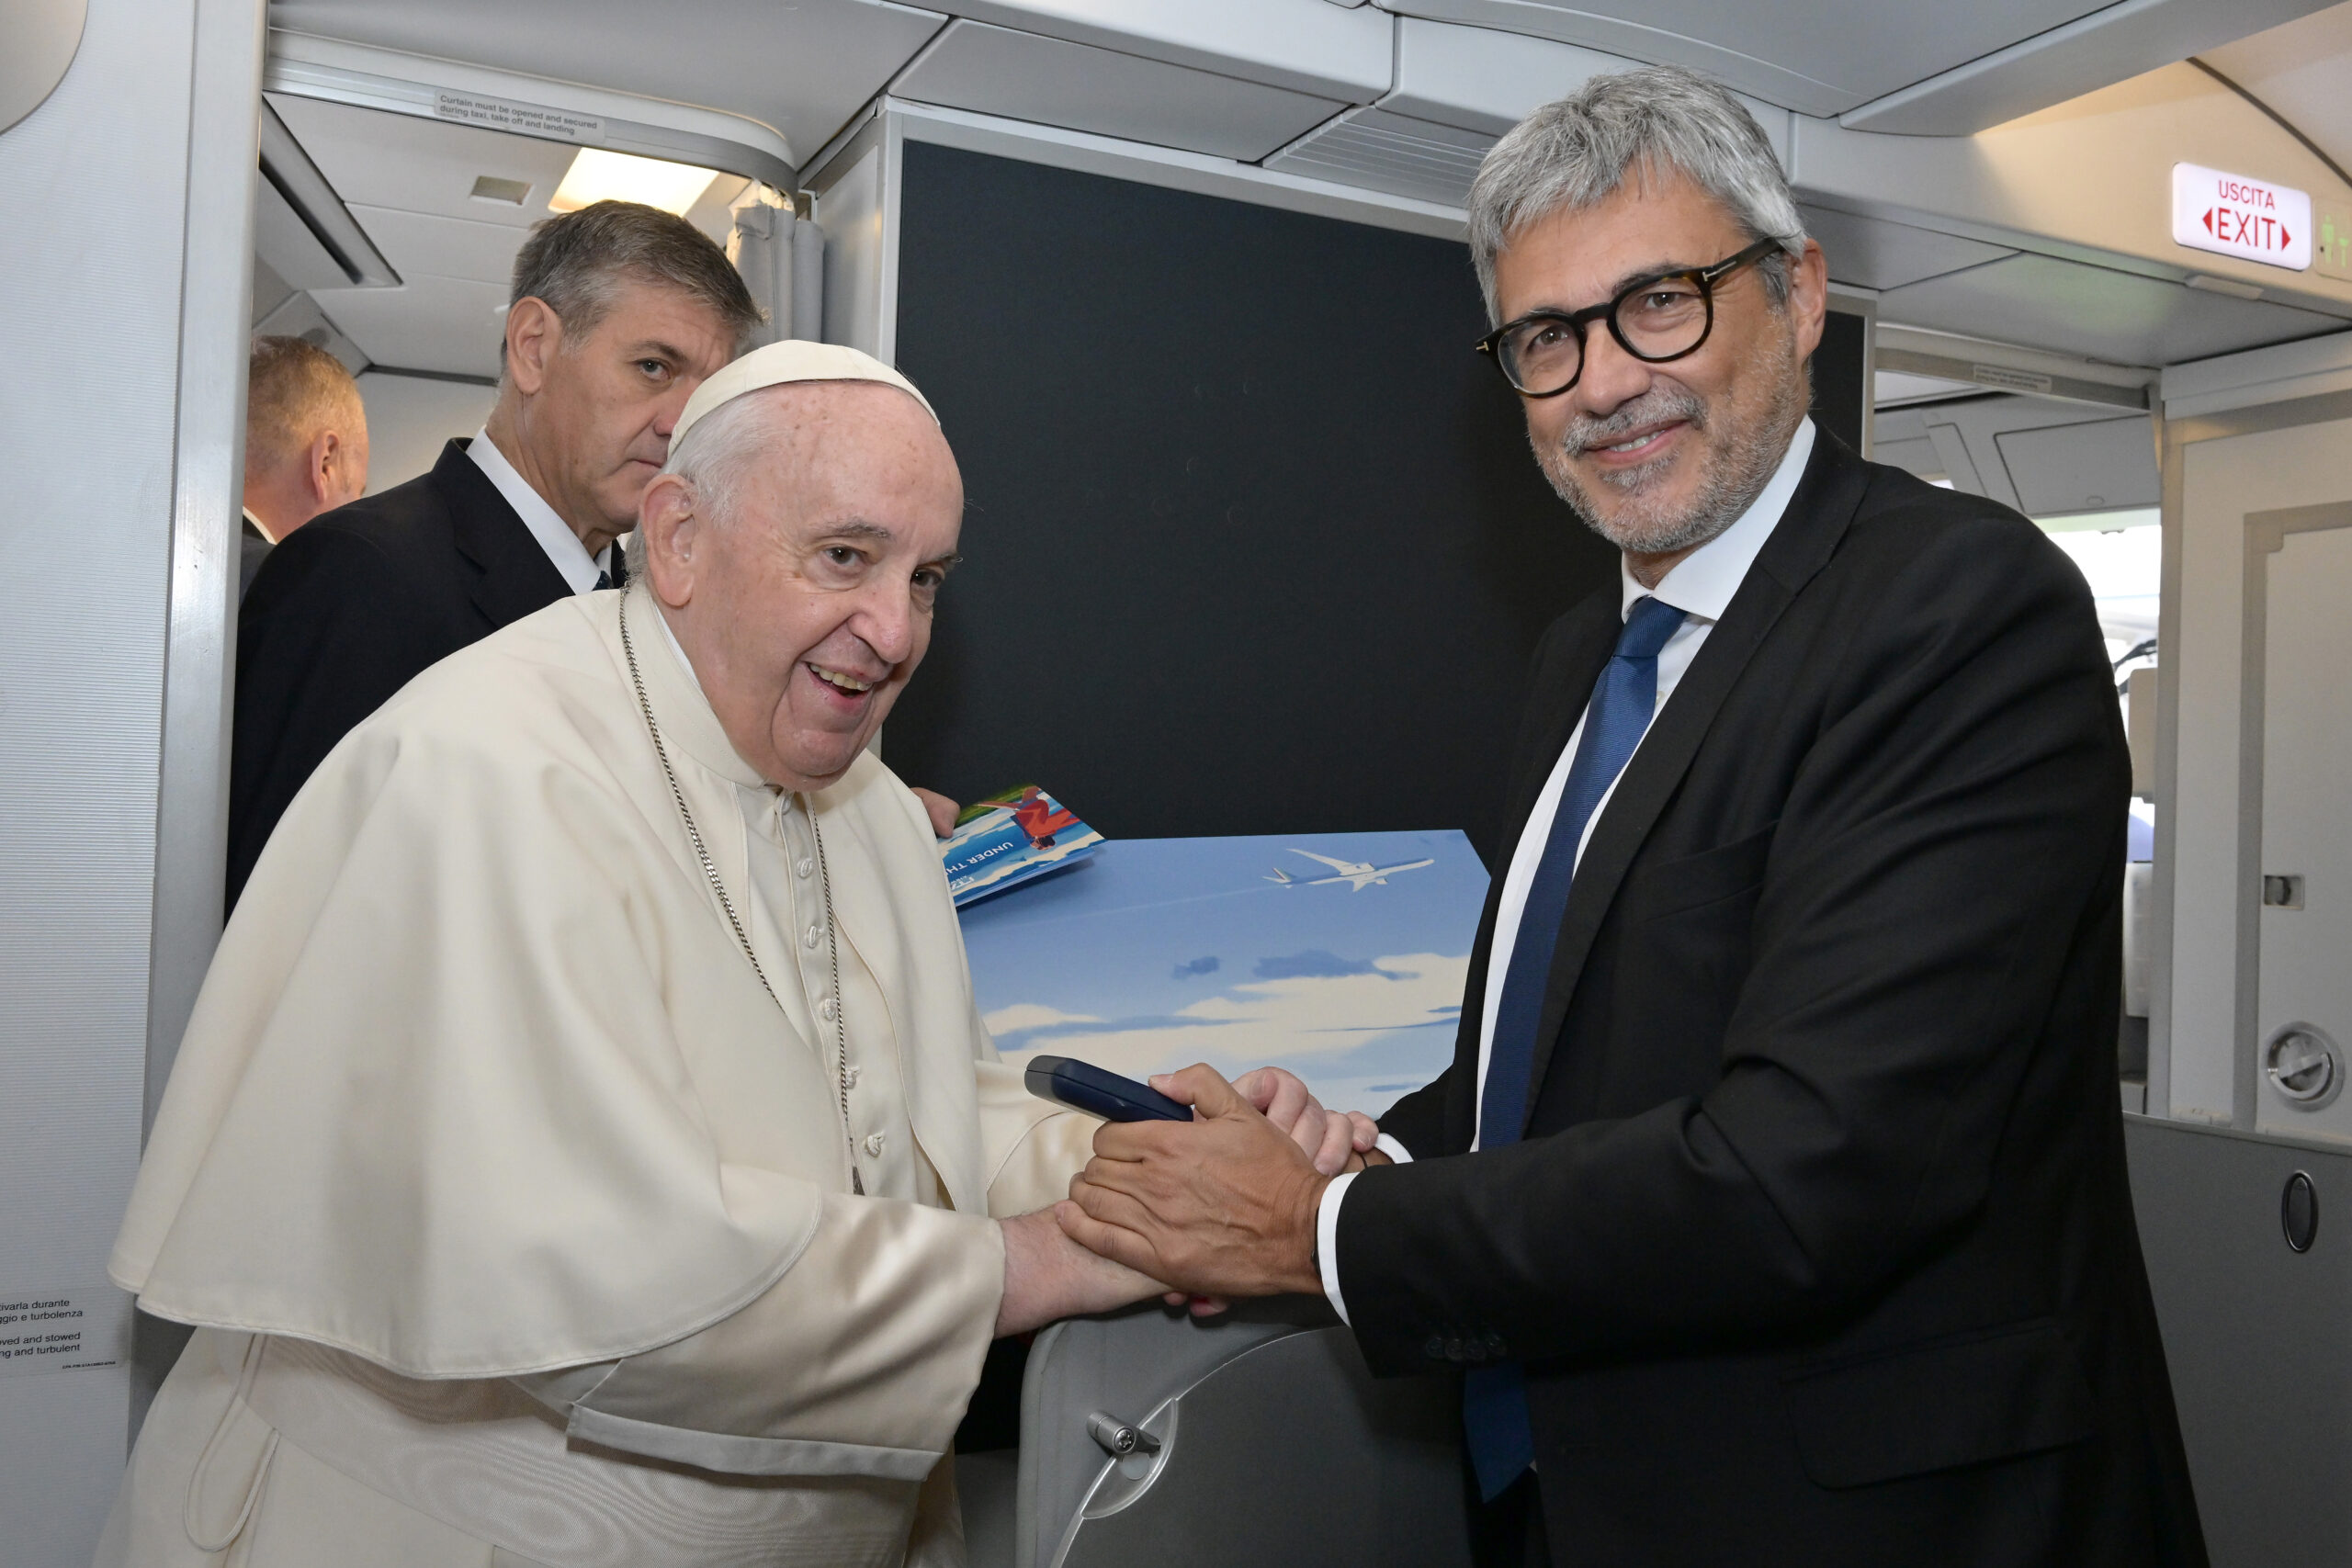 ITA Airways hands over “The Sustainability Manifesto” to Pope Francis